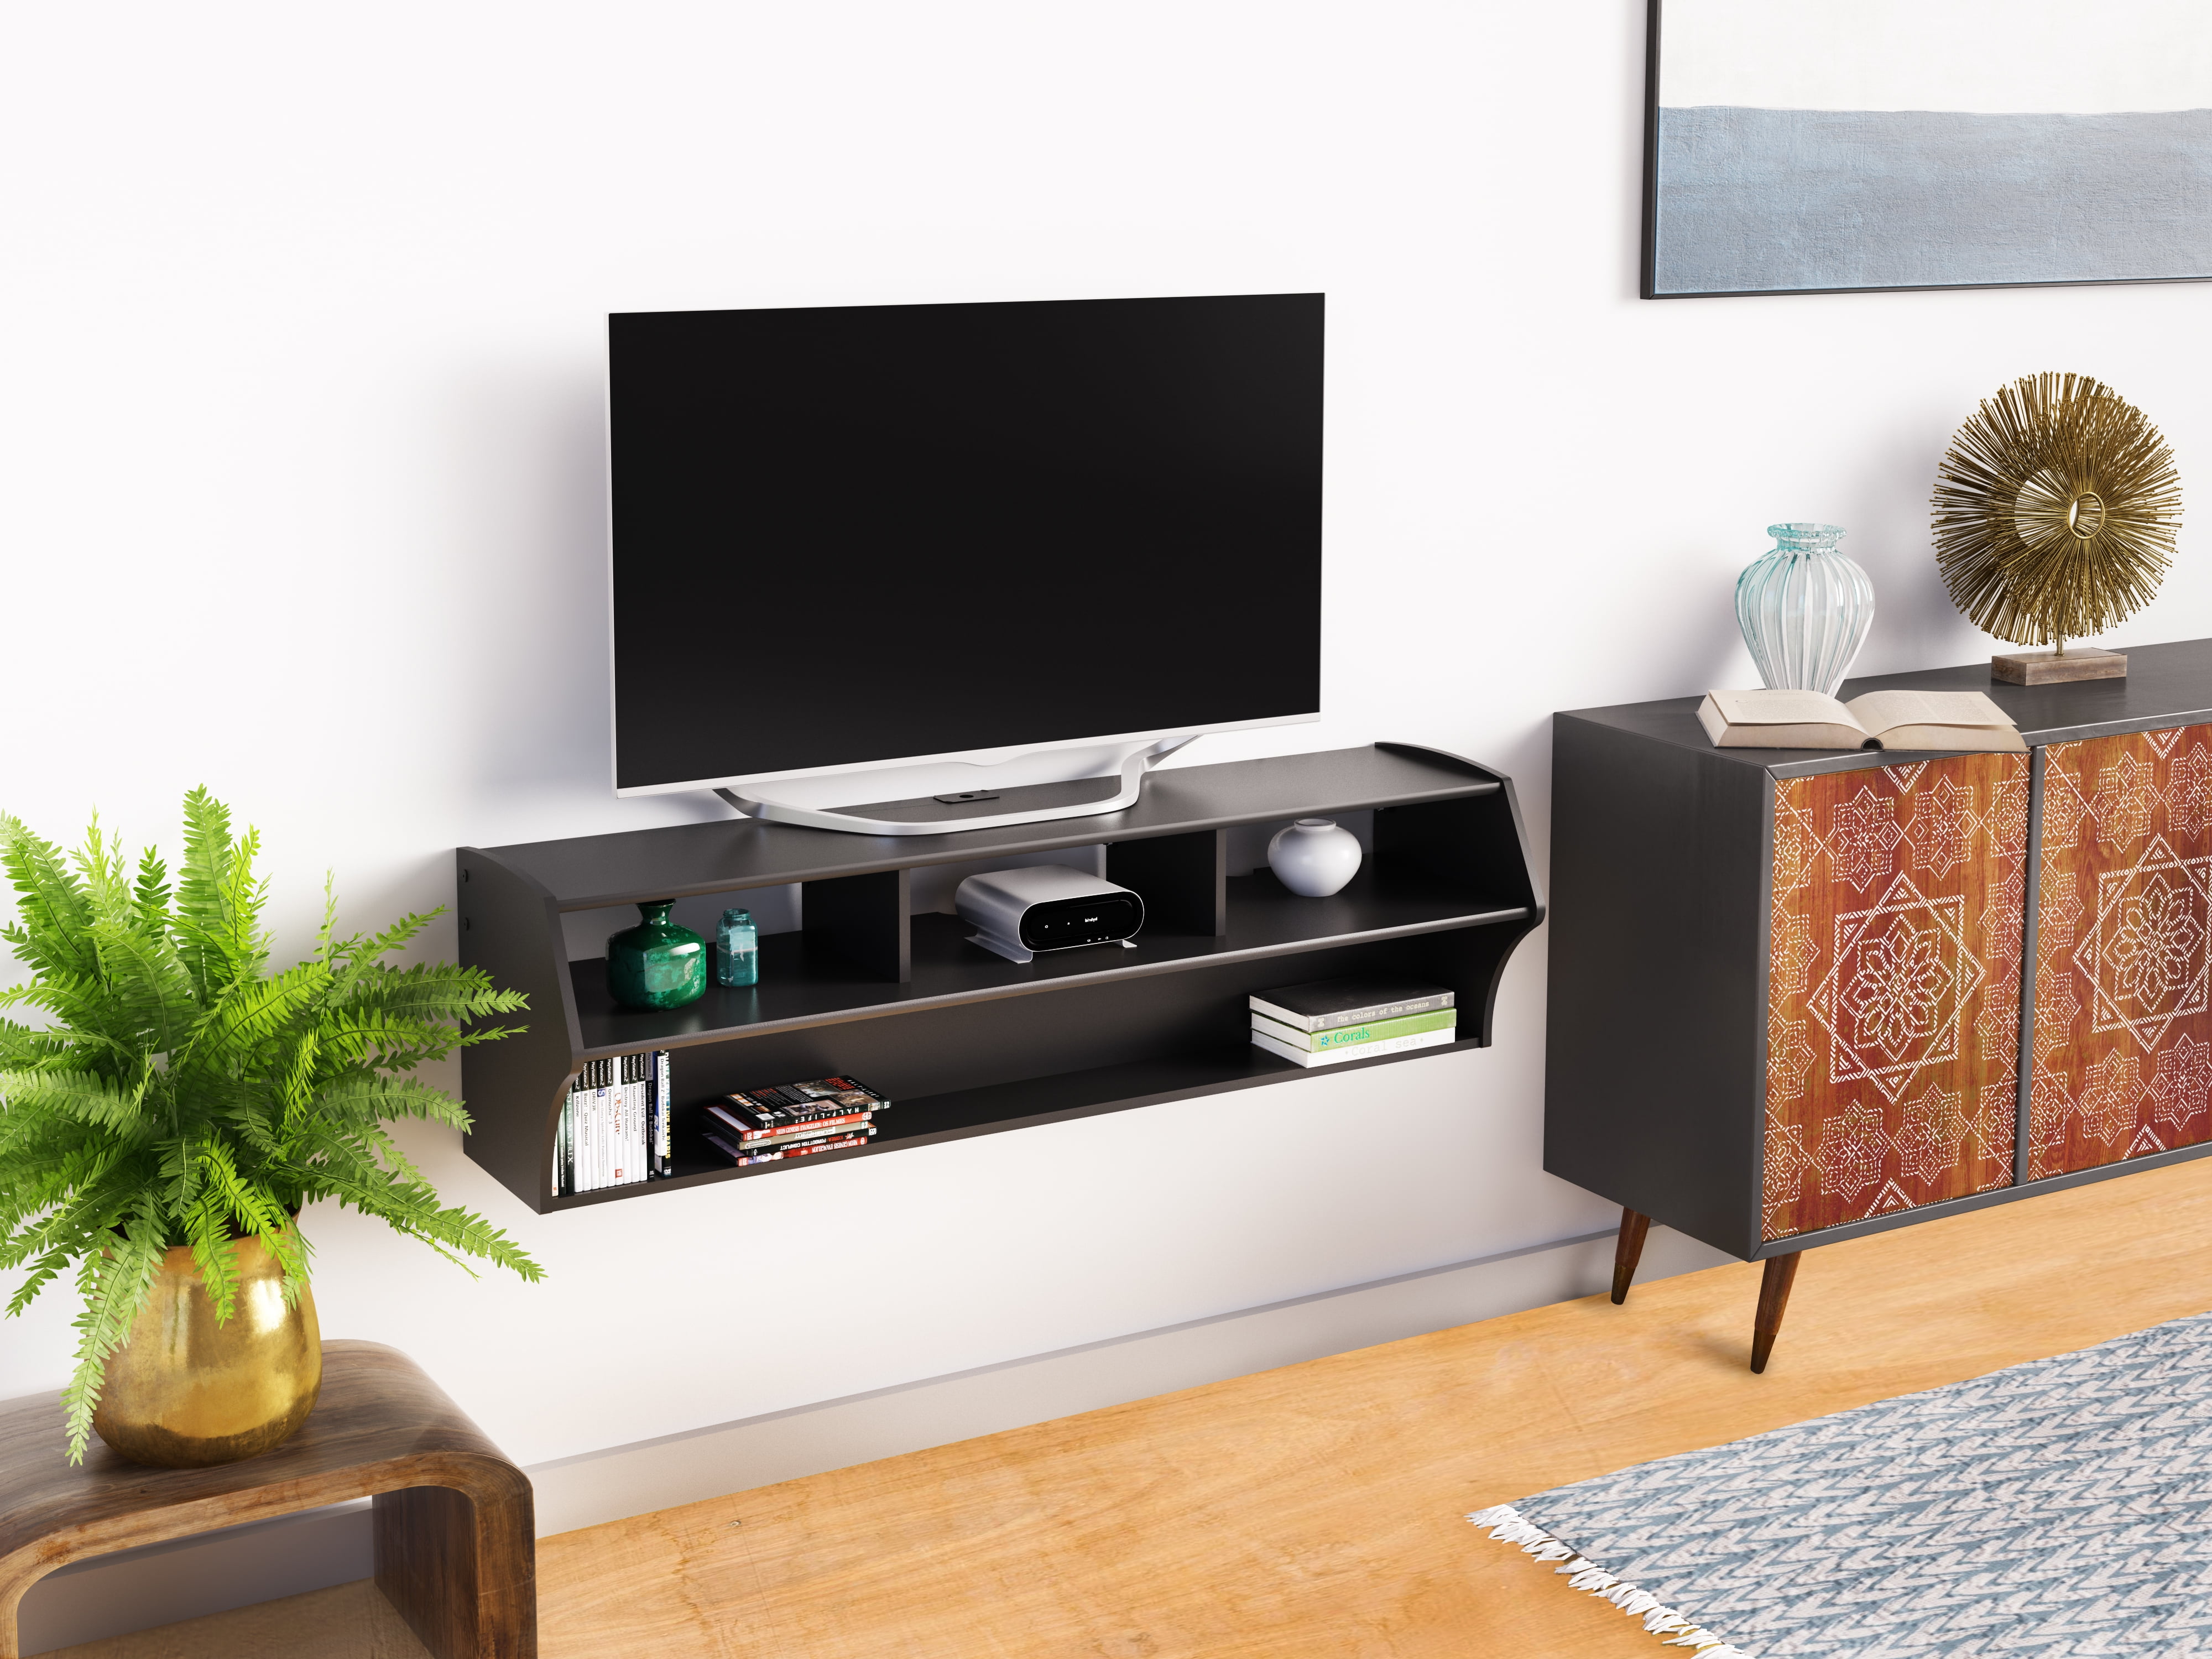 Altus Plus Floating TV Stand for TVs up to 60" - Walmart ...